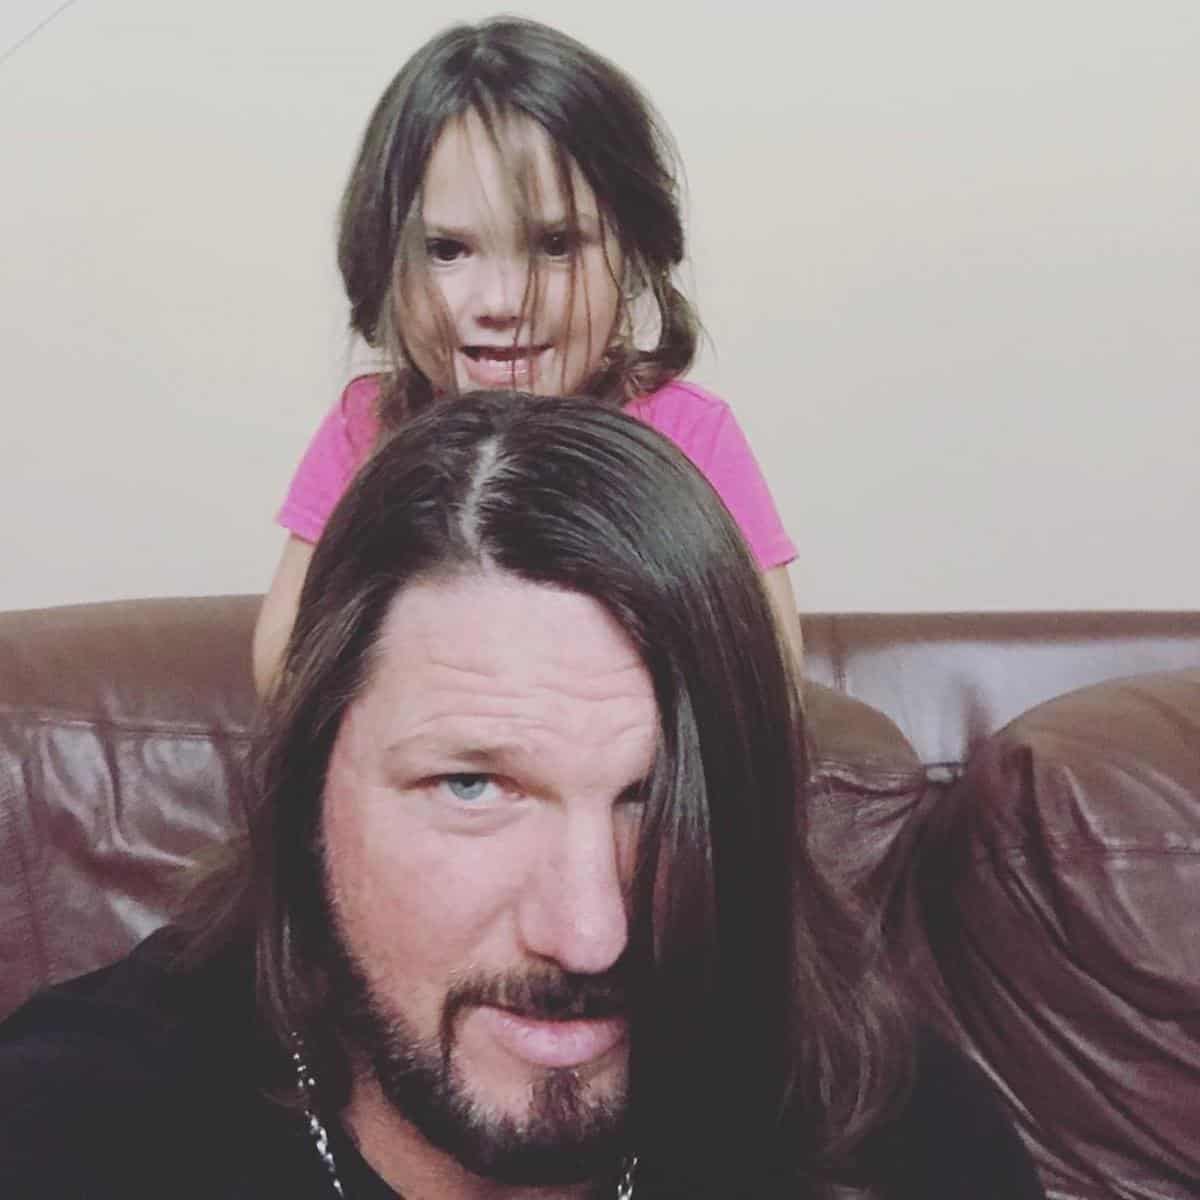 AJ Styles with daughter Anney